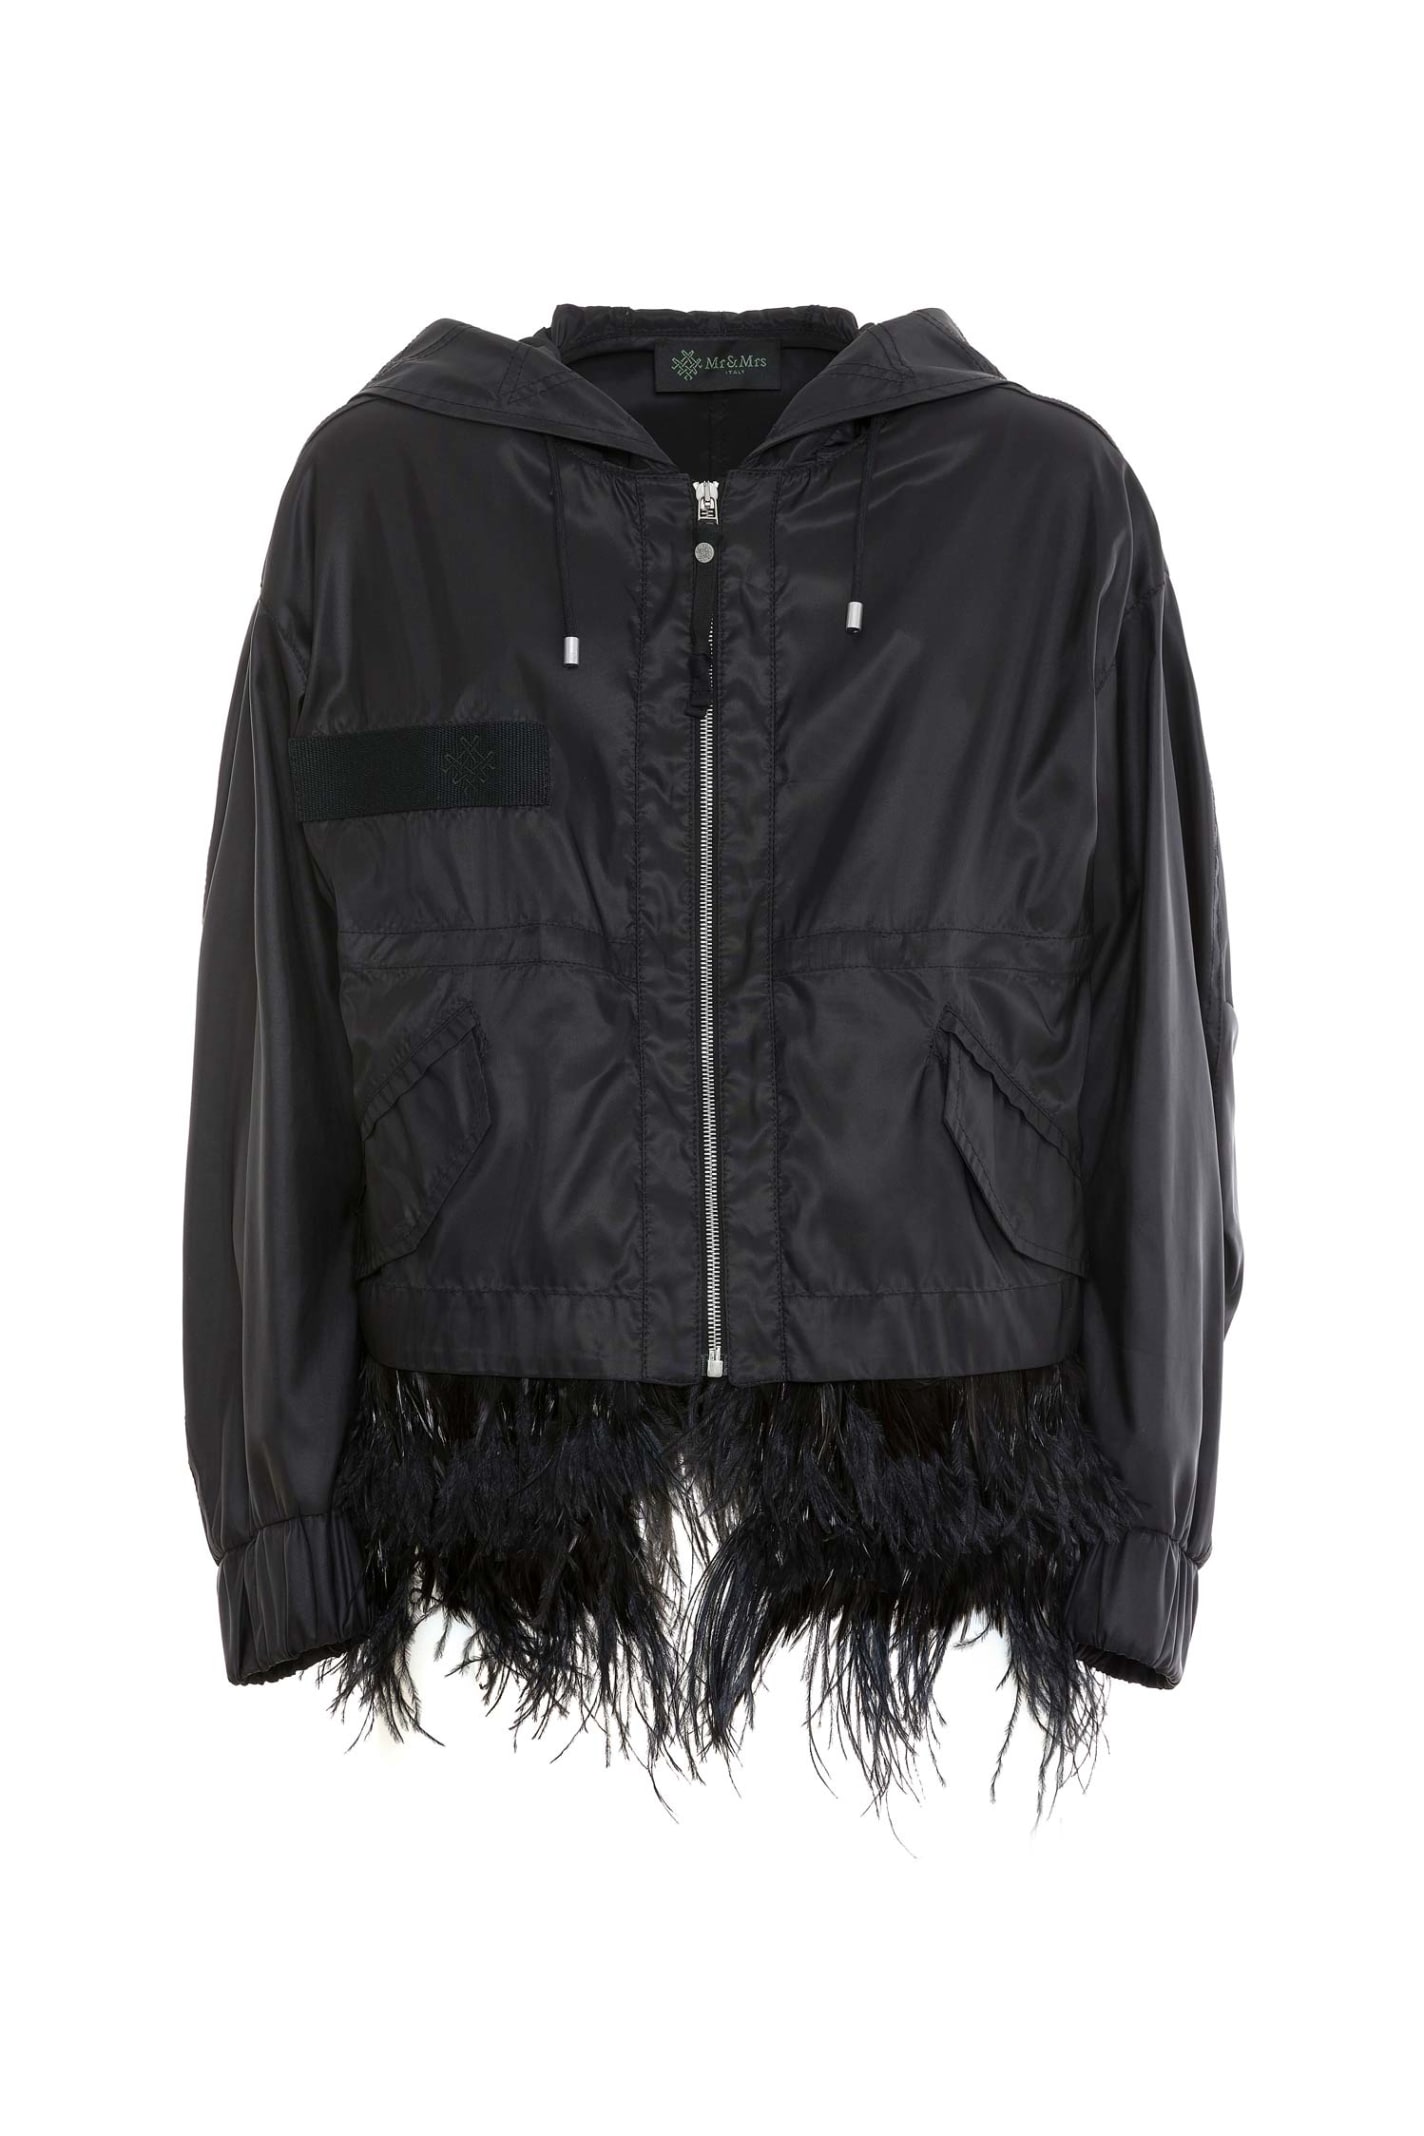 Mr & Mrs Italy Jacket With Feathers For Woman